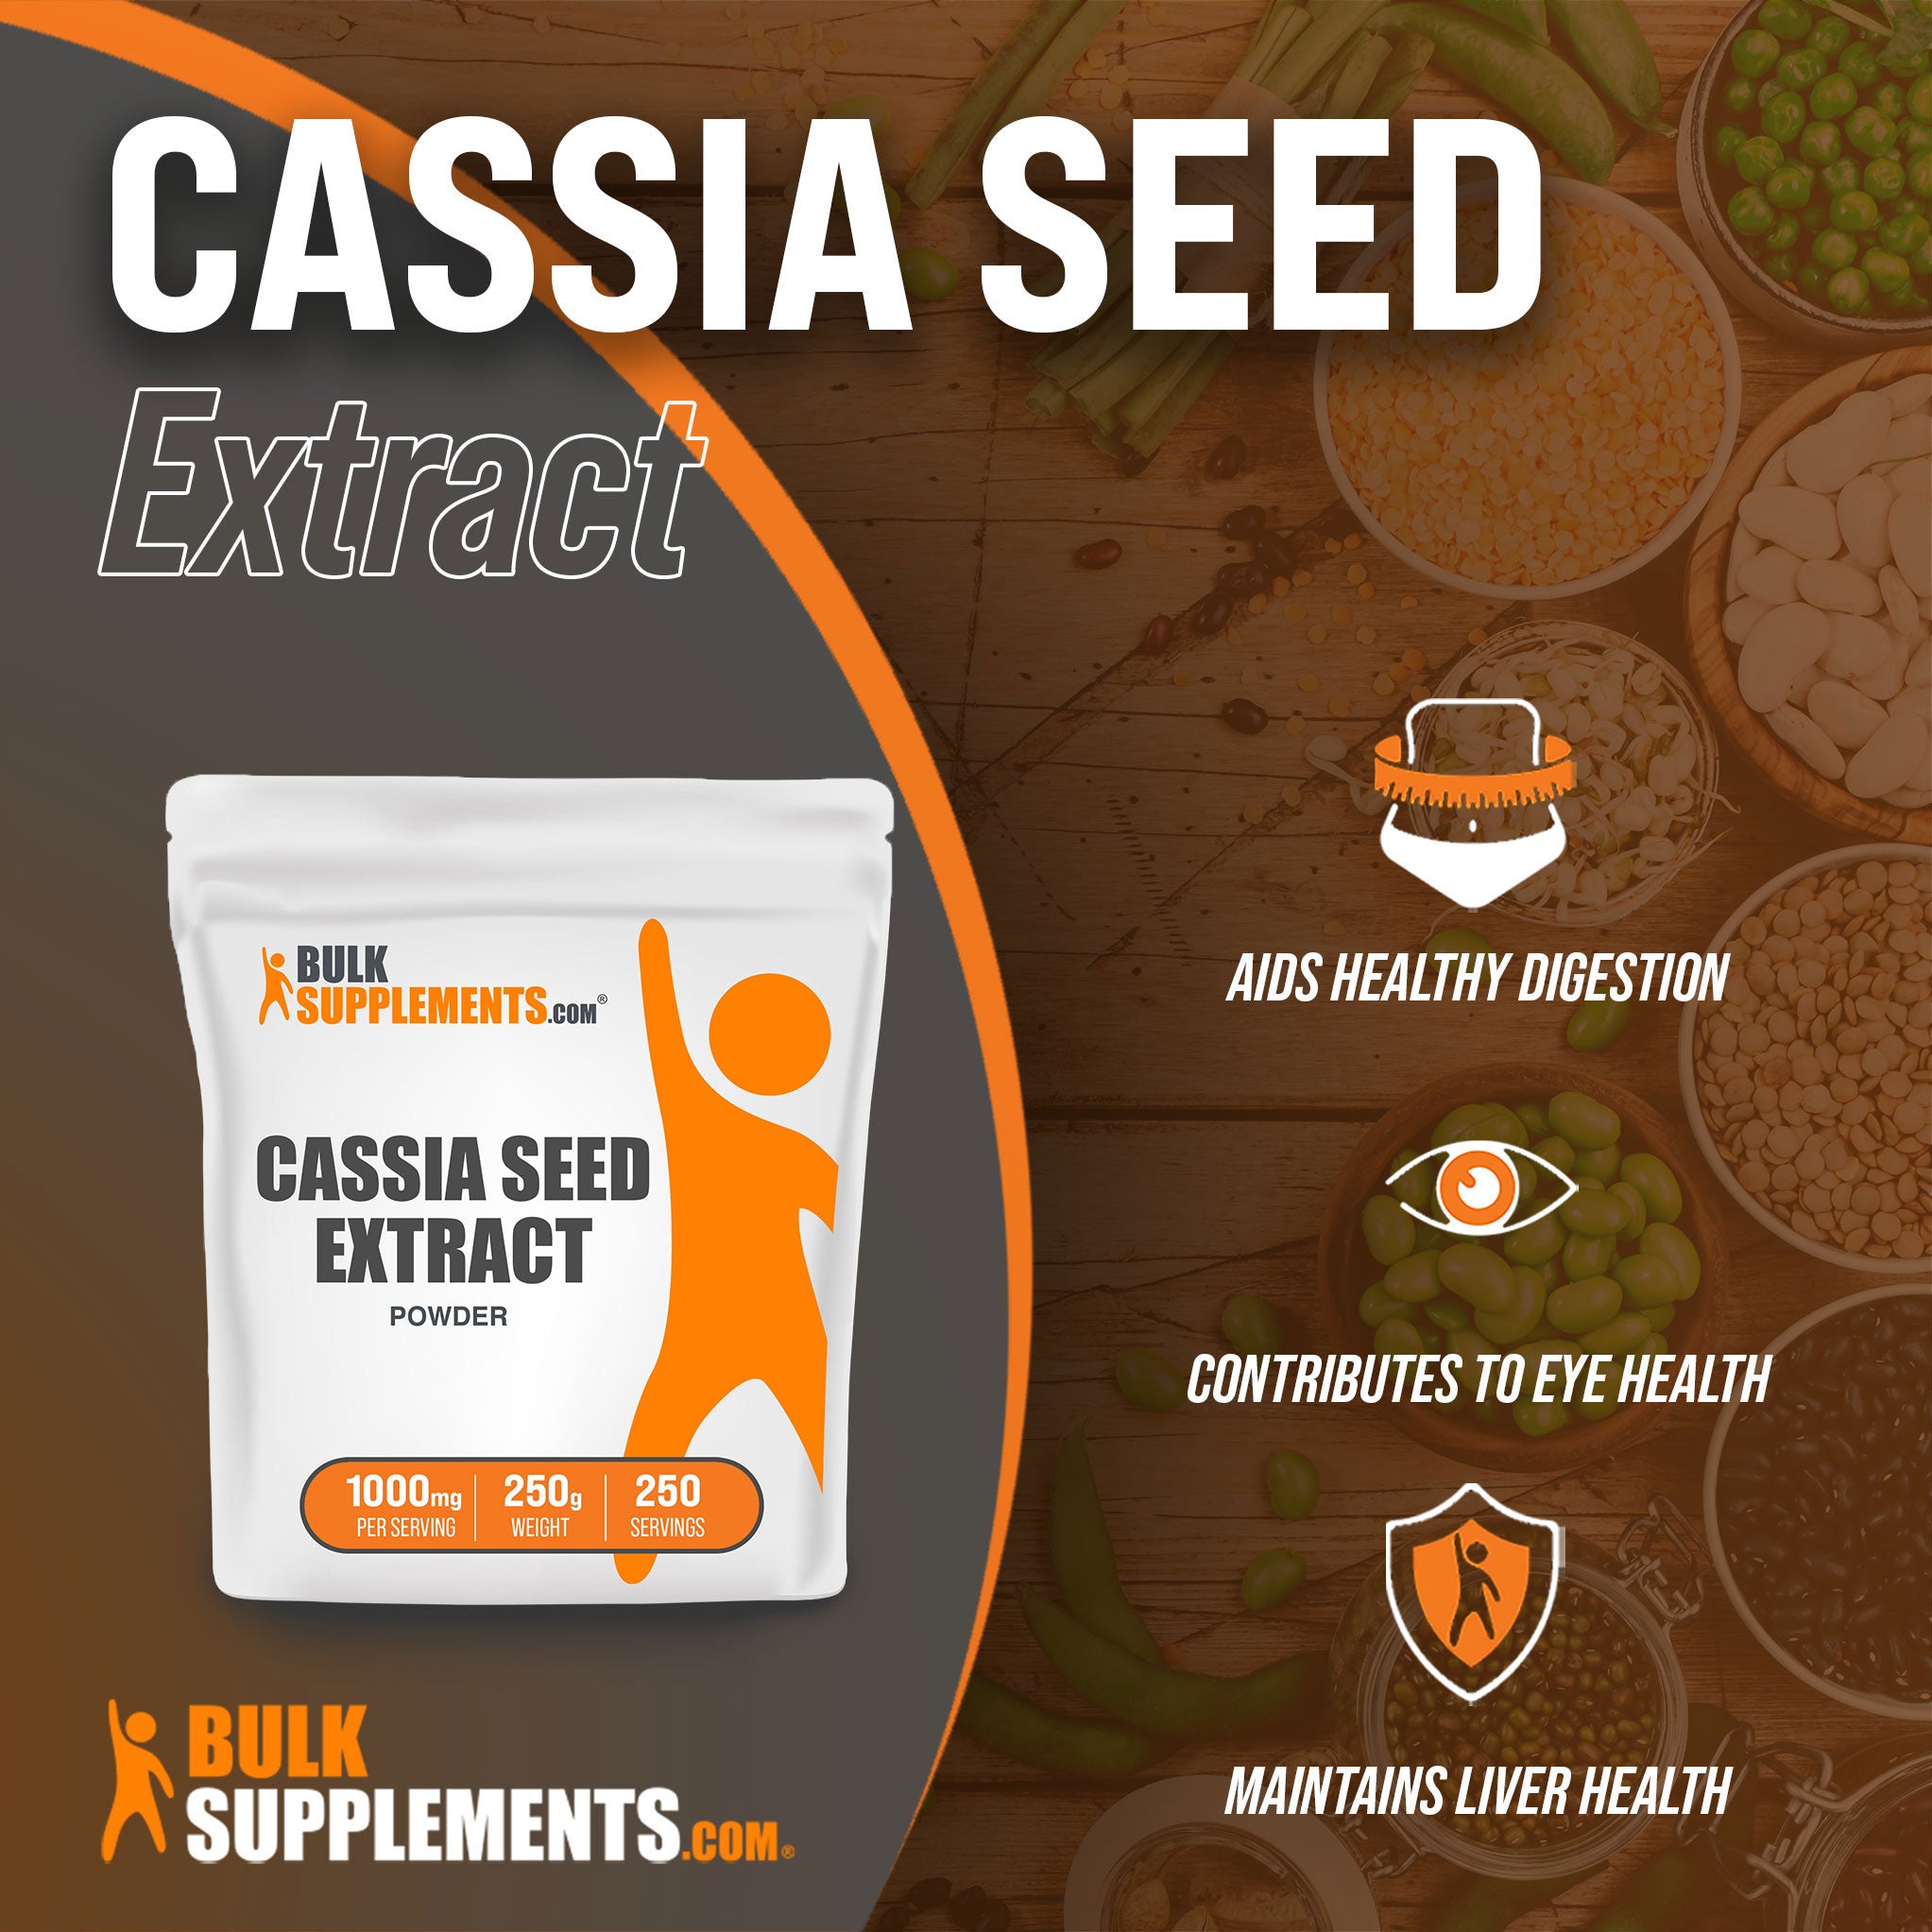 Benefits of Cassia Seed Extract; aids healthy digestion, contributes to eye health, maintains liver health